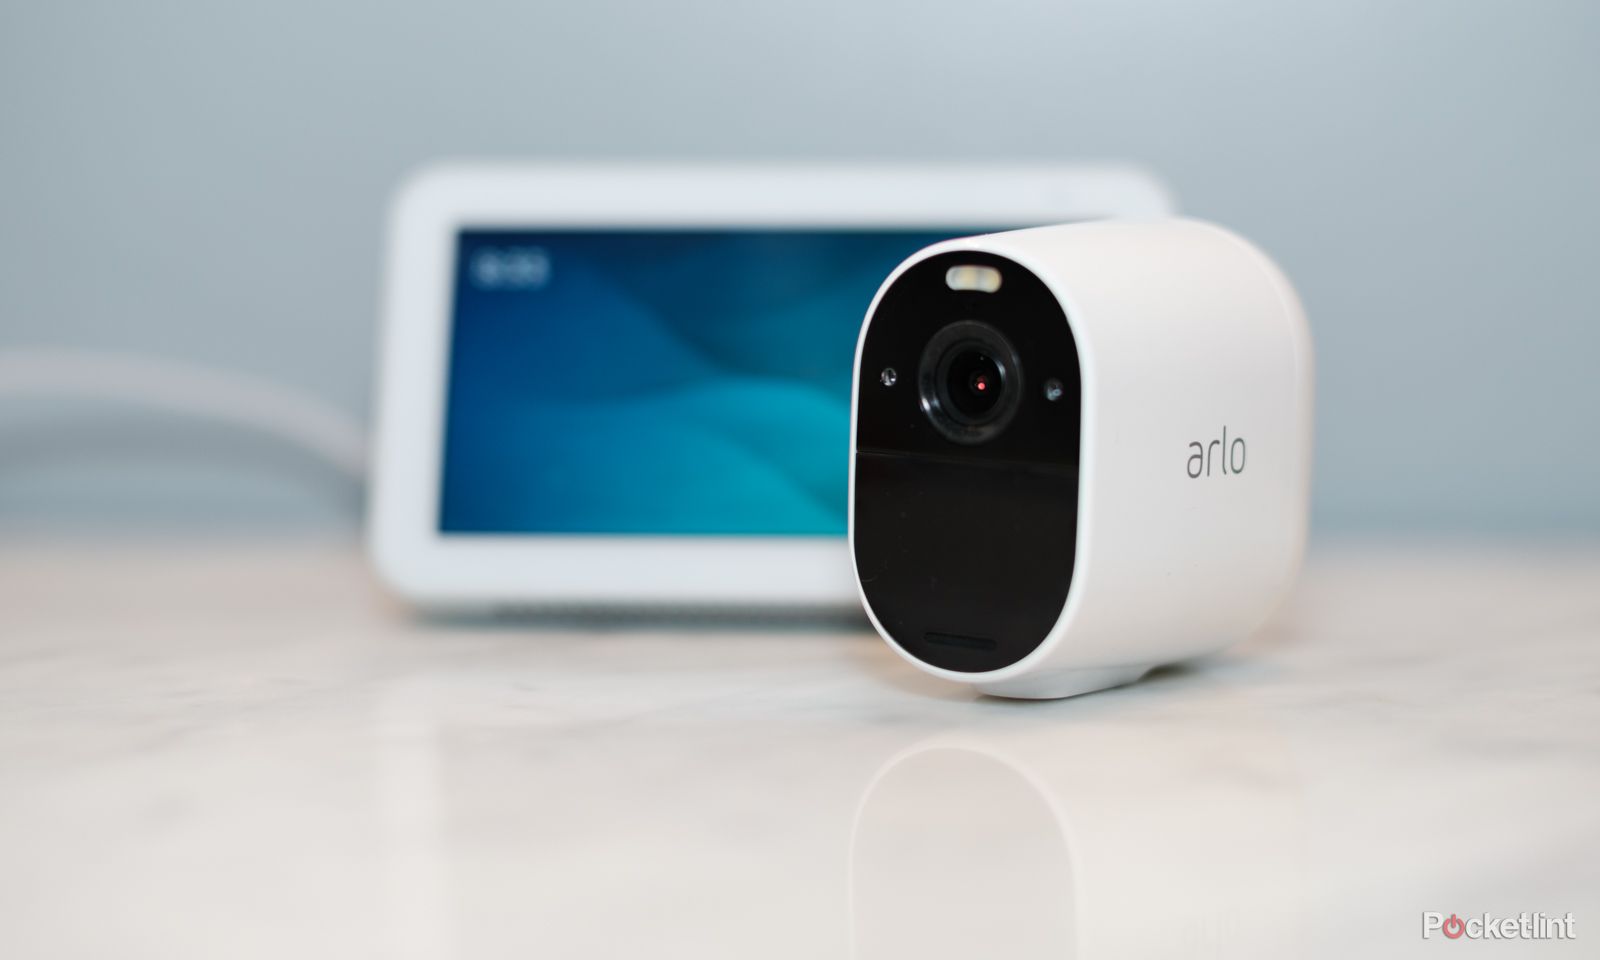 how-to-connect-arlo-to-alexa-hillary-grigonis-pocket-lint-9933